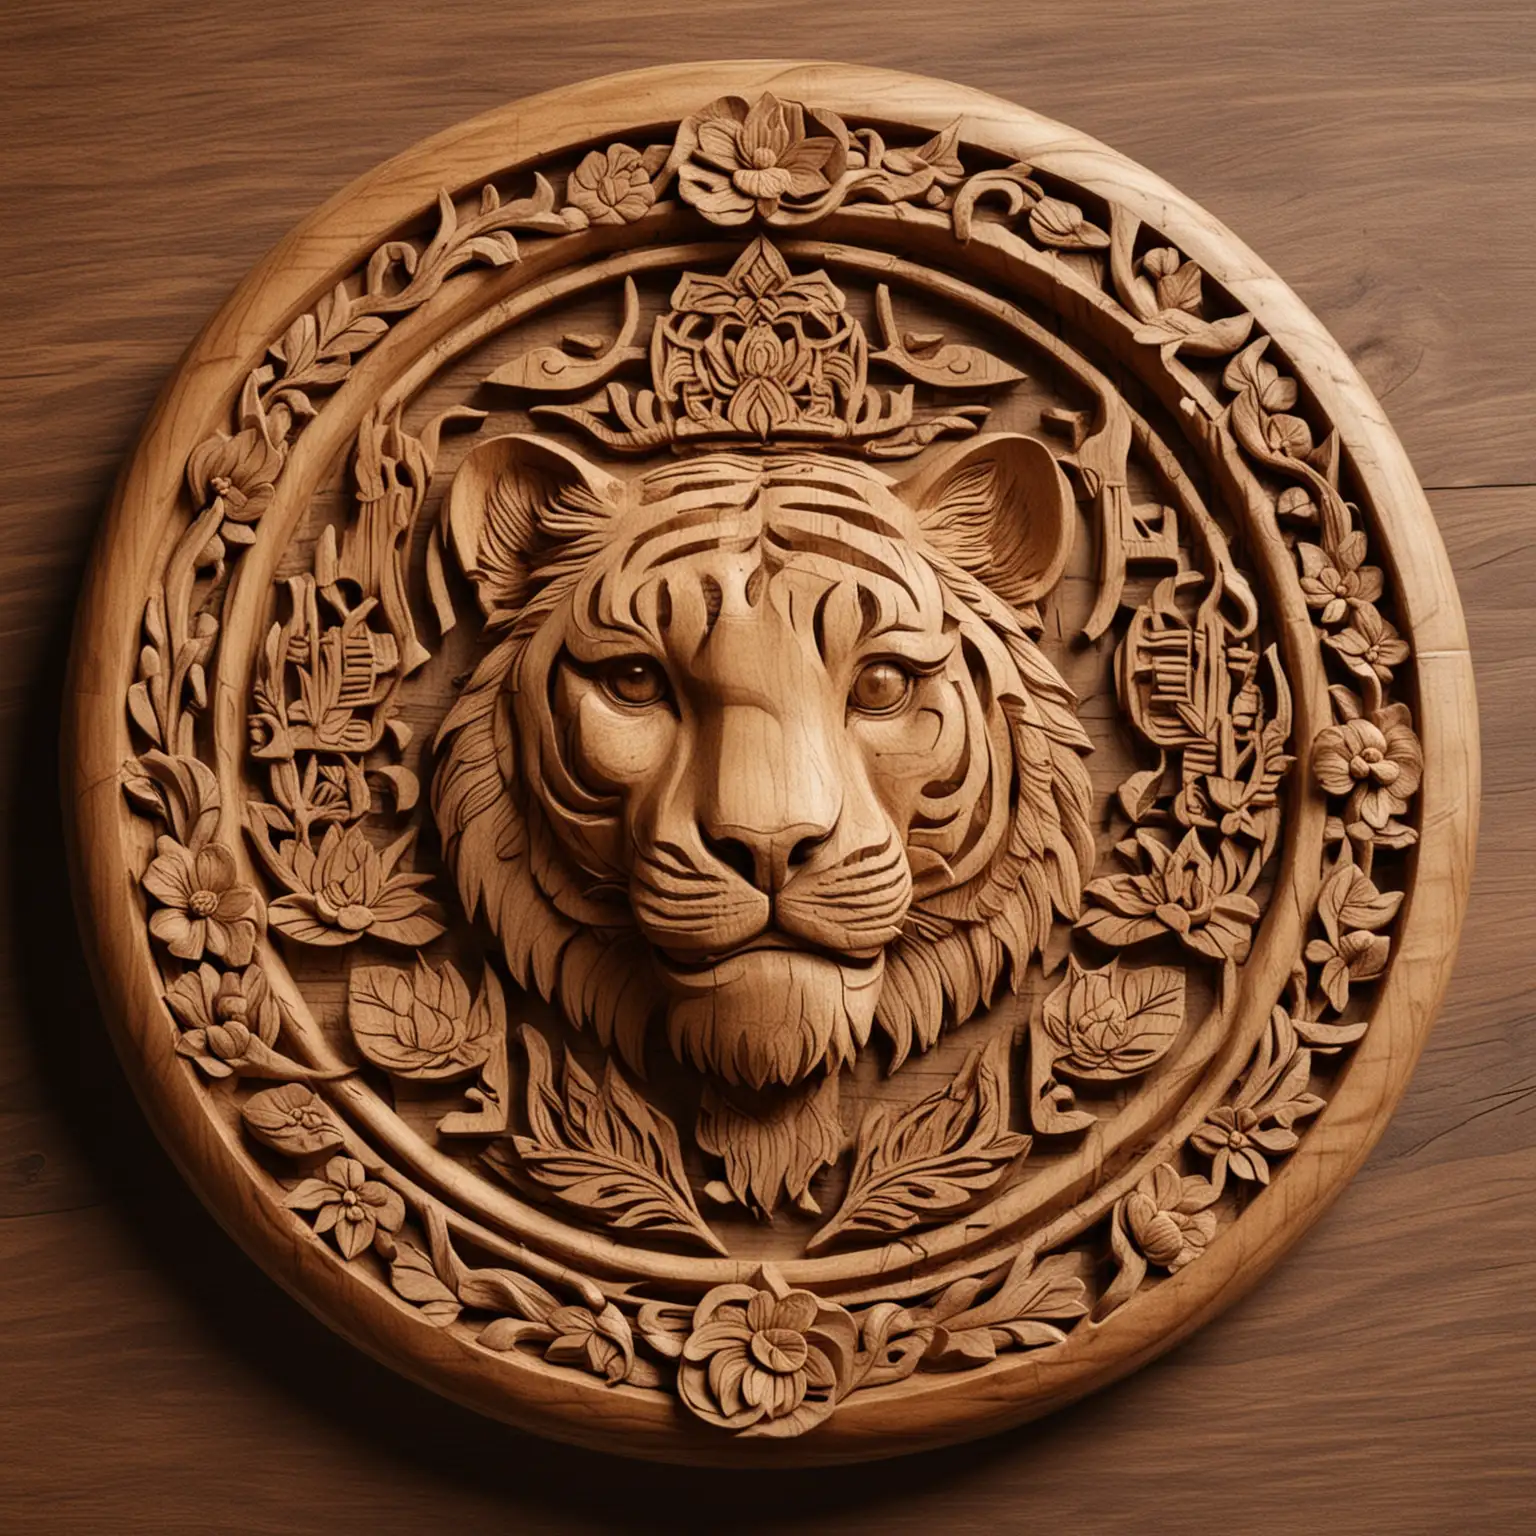 The ancient logo is a brown circle surrounded by wooden carvings and in the middle there is a wooden tiger and a lotus flower